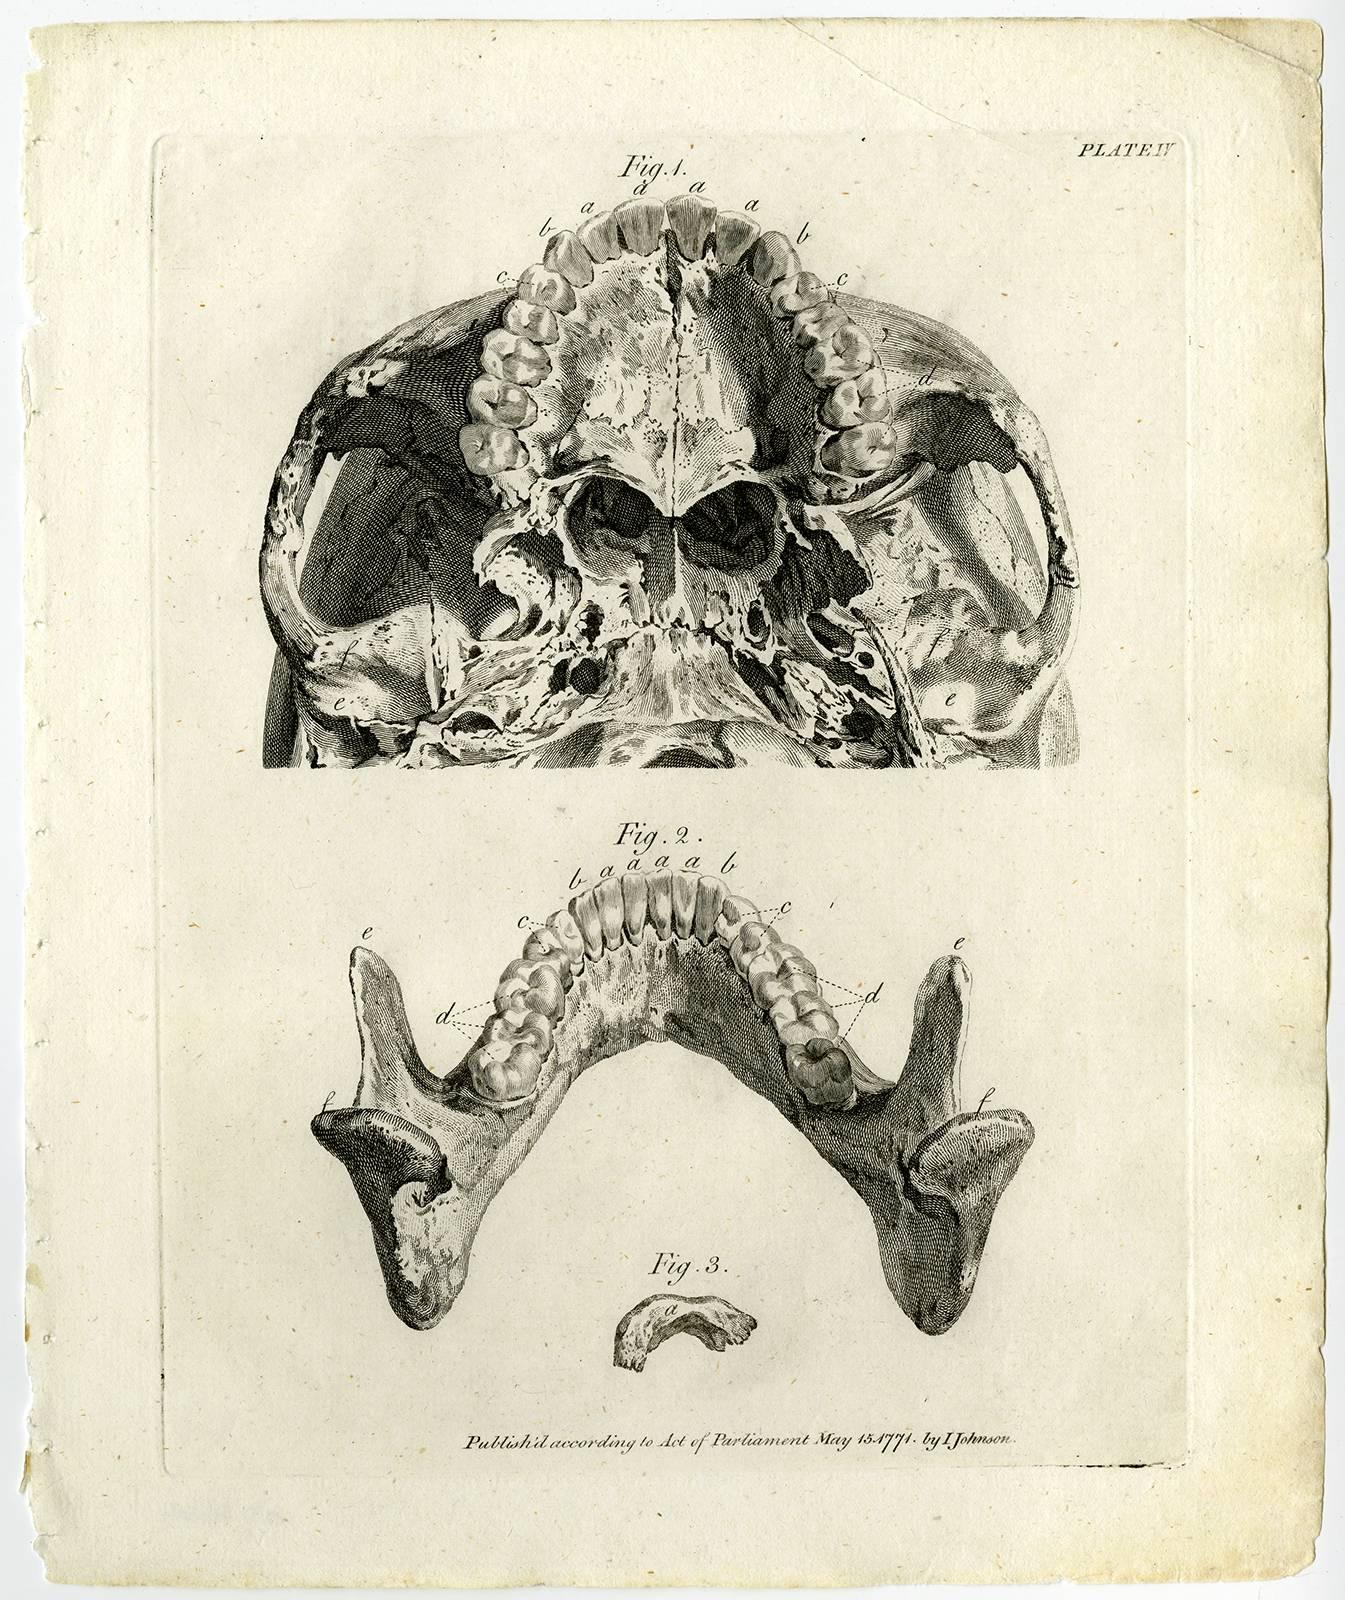 Copperplate engraving. on hand laid (verge) paper.

16 Antique prints, titled: 'Historia naturalis dentium humanorum [...]. Natuurlyke Historie der Tanden van den Mensch …' - ('A natural history of the human teeth ... '). A set of 16 very detailed